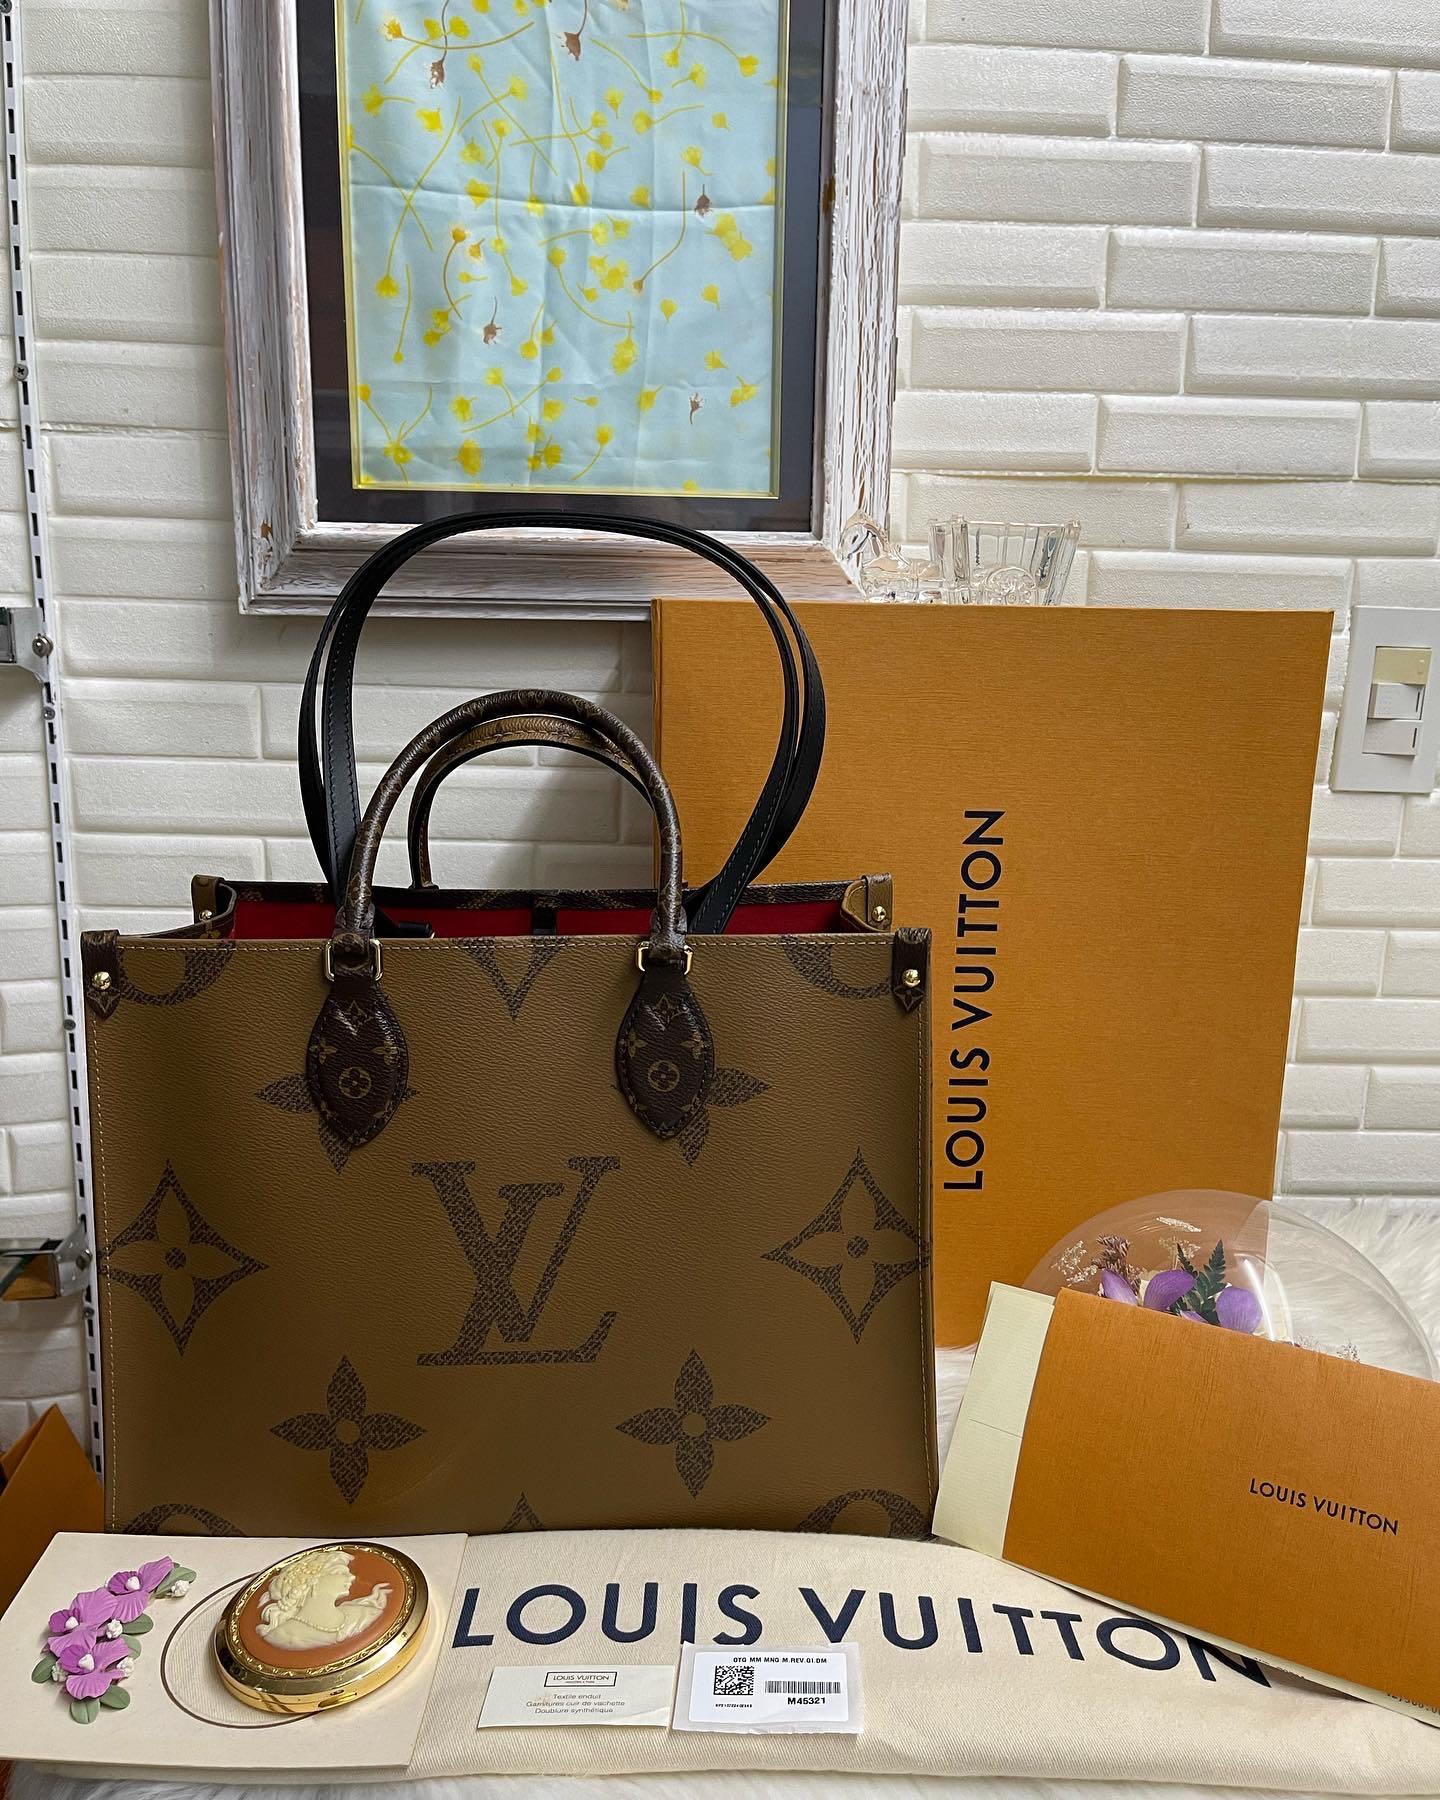 Louis Vuitton Addicted on Instagram: “GM OR MM on the OTG